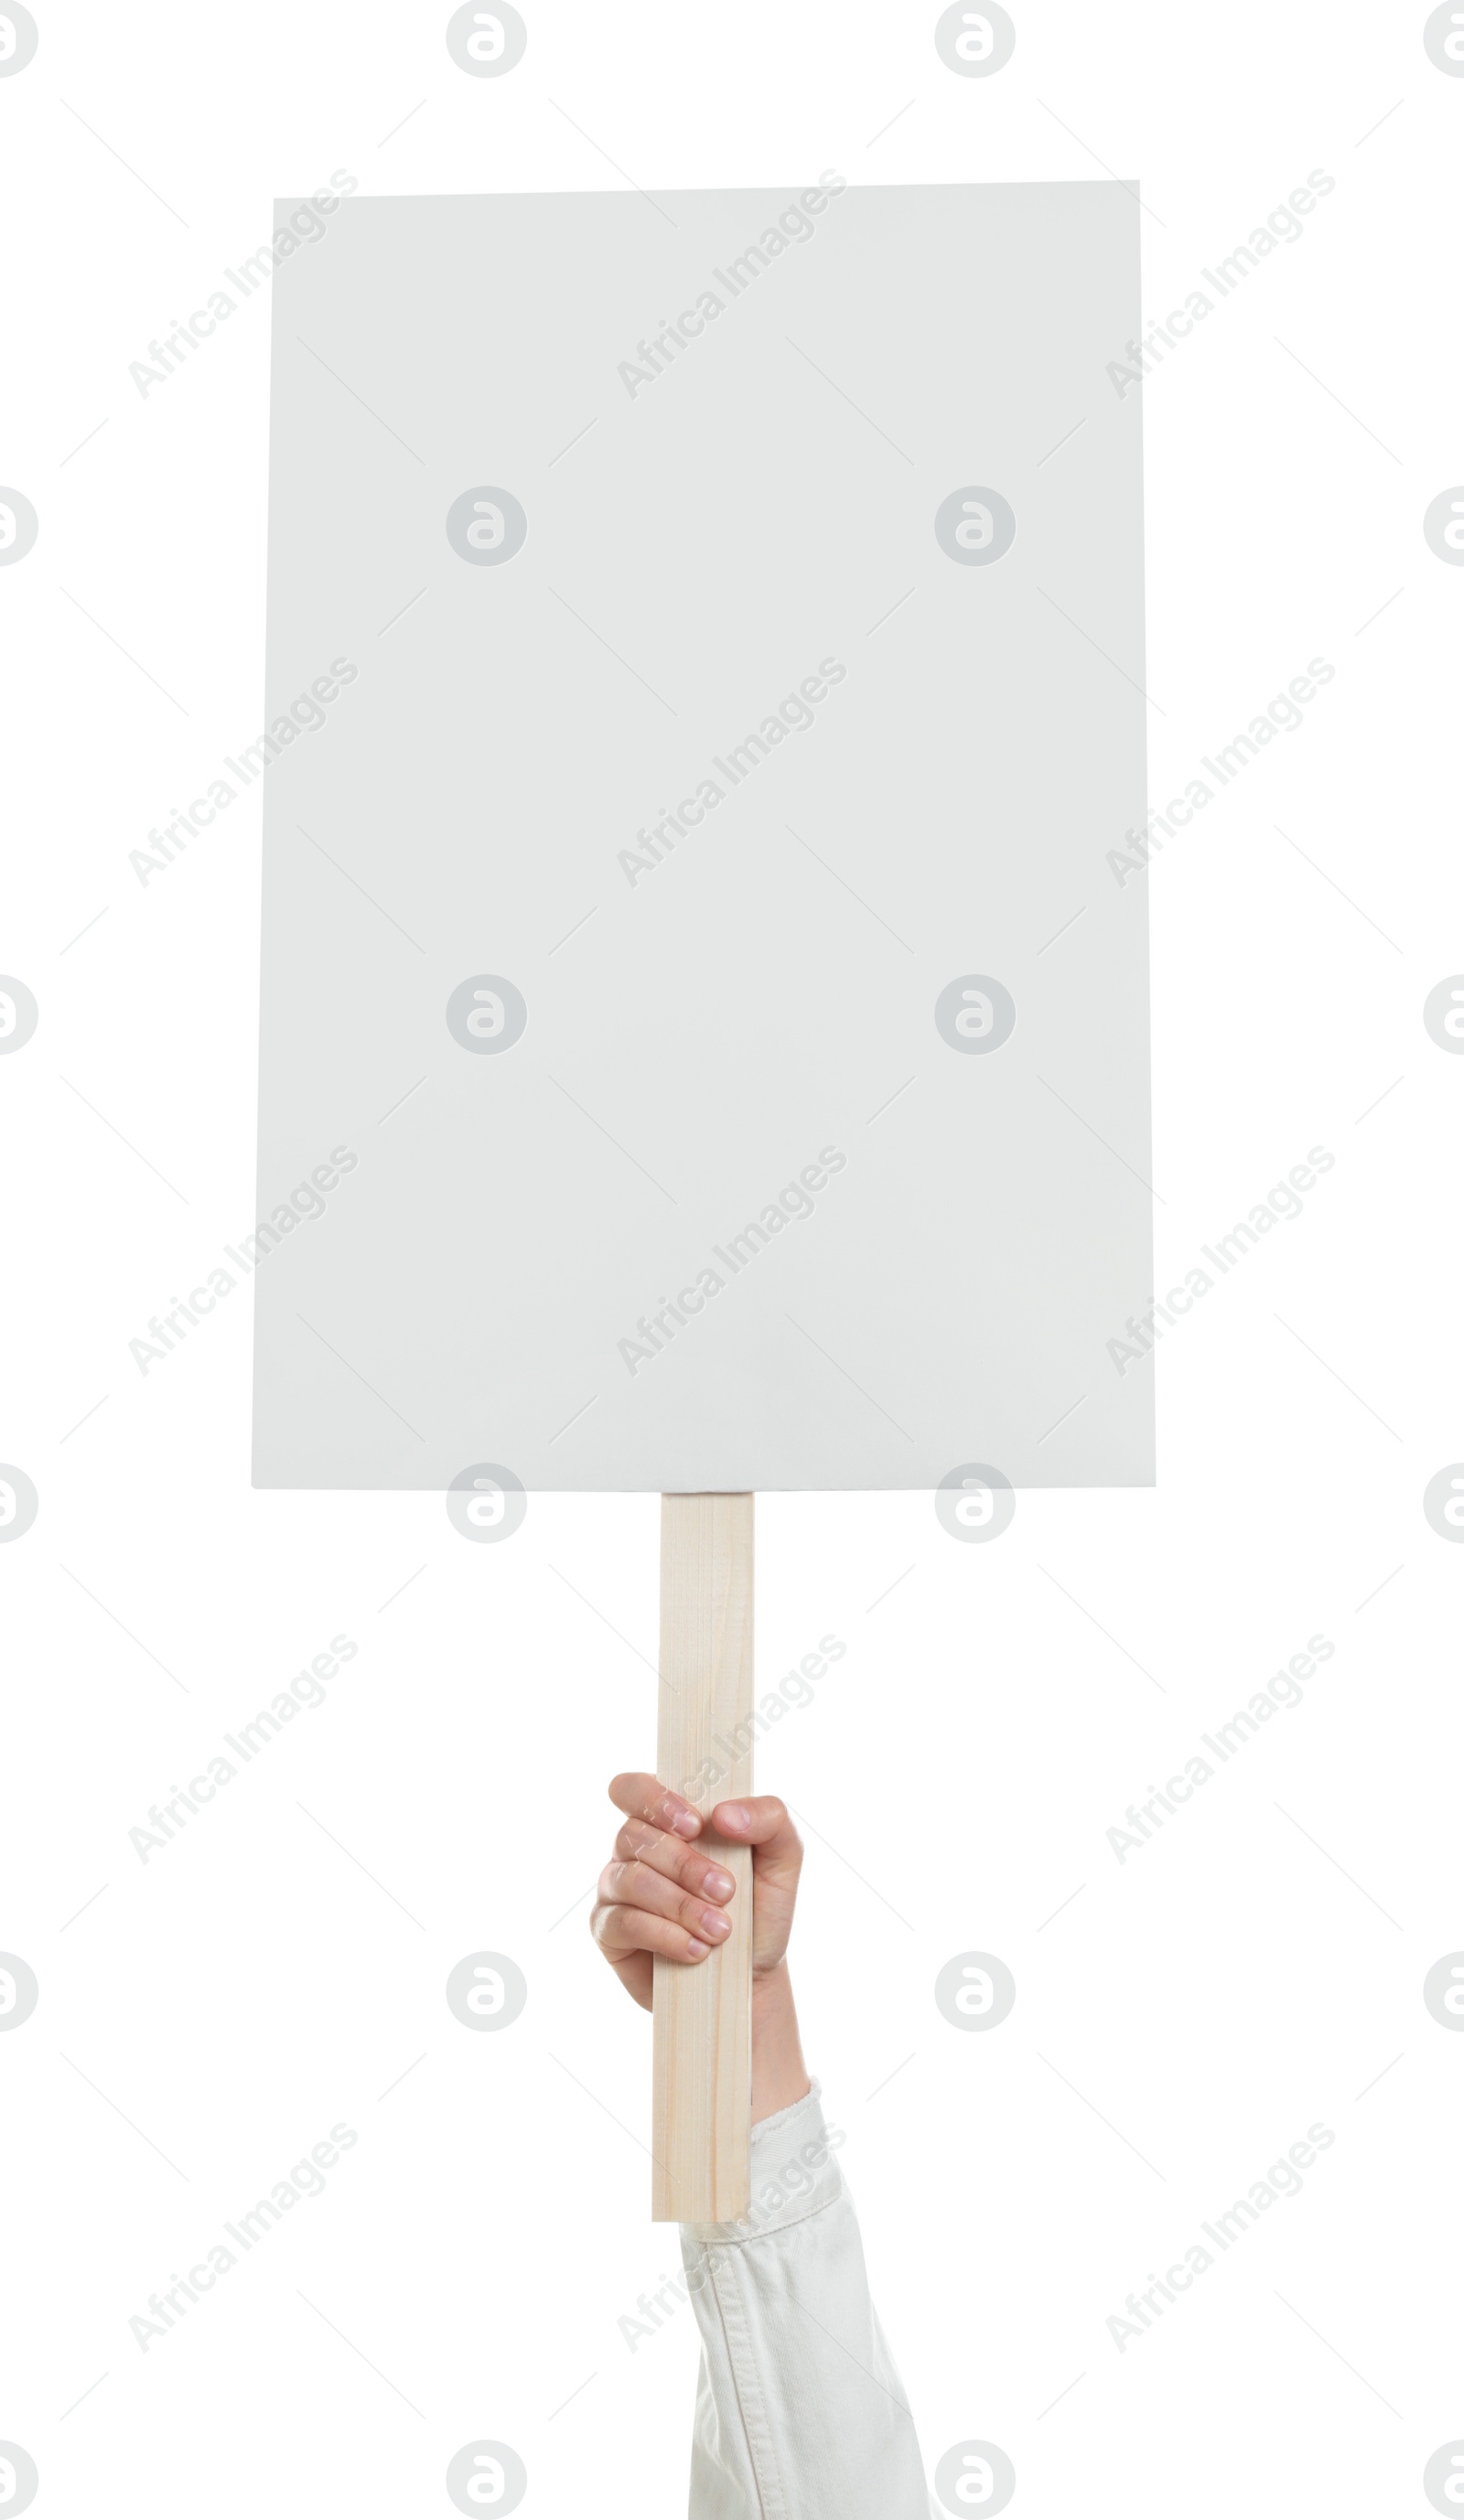 Photo of Woman holding blank protest sign on white background, closeup